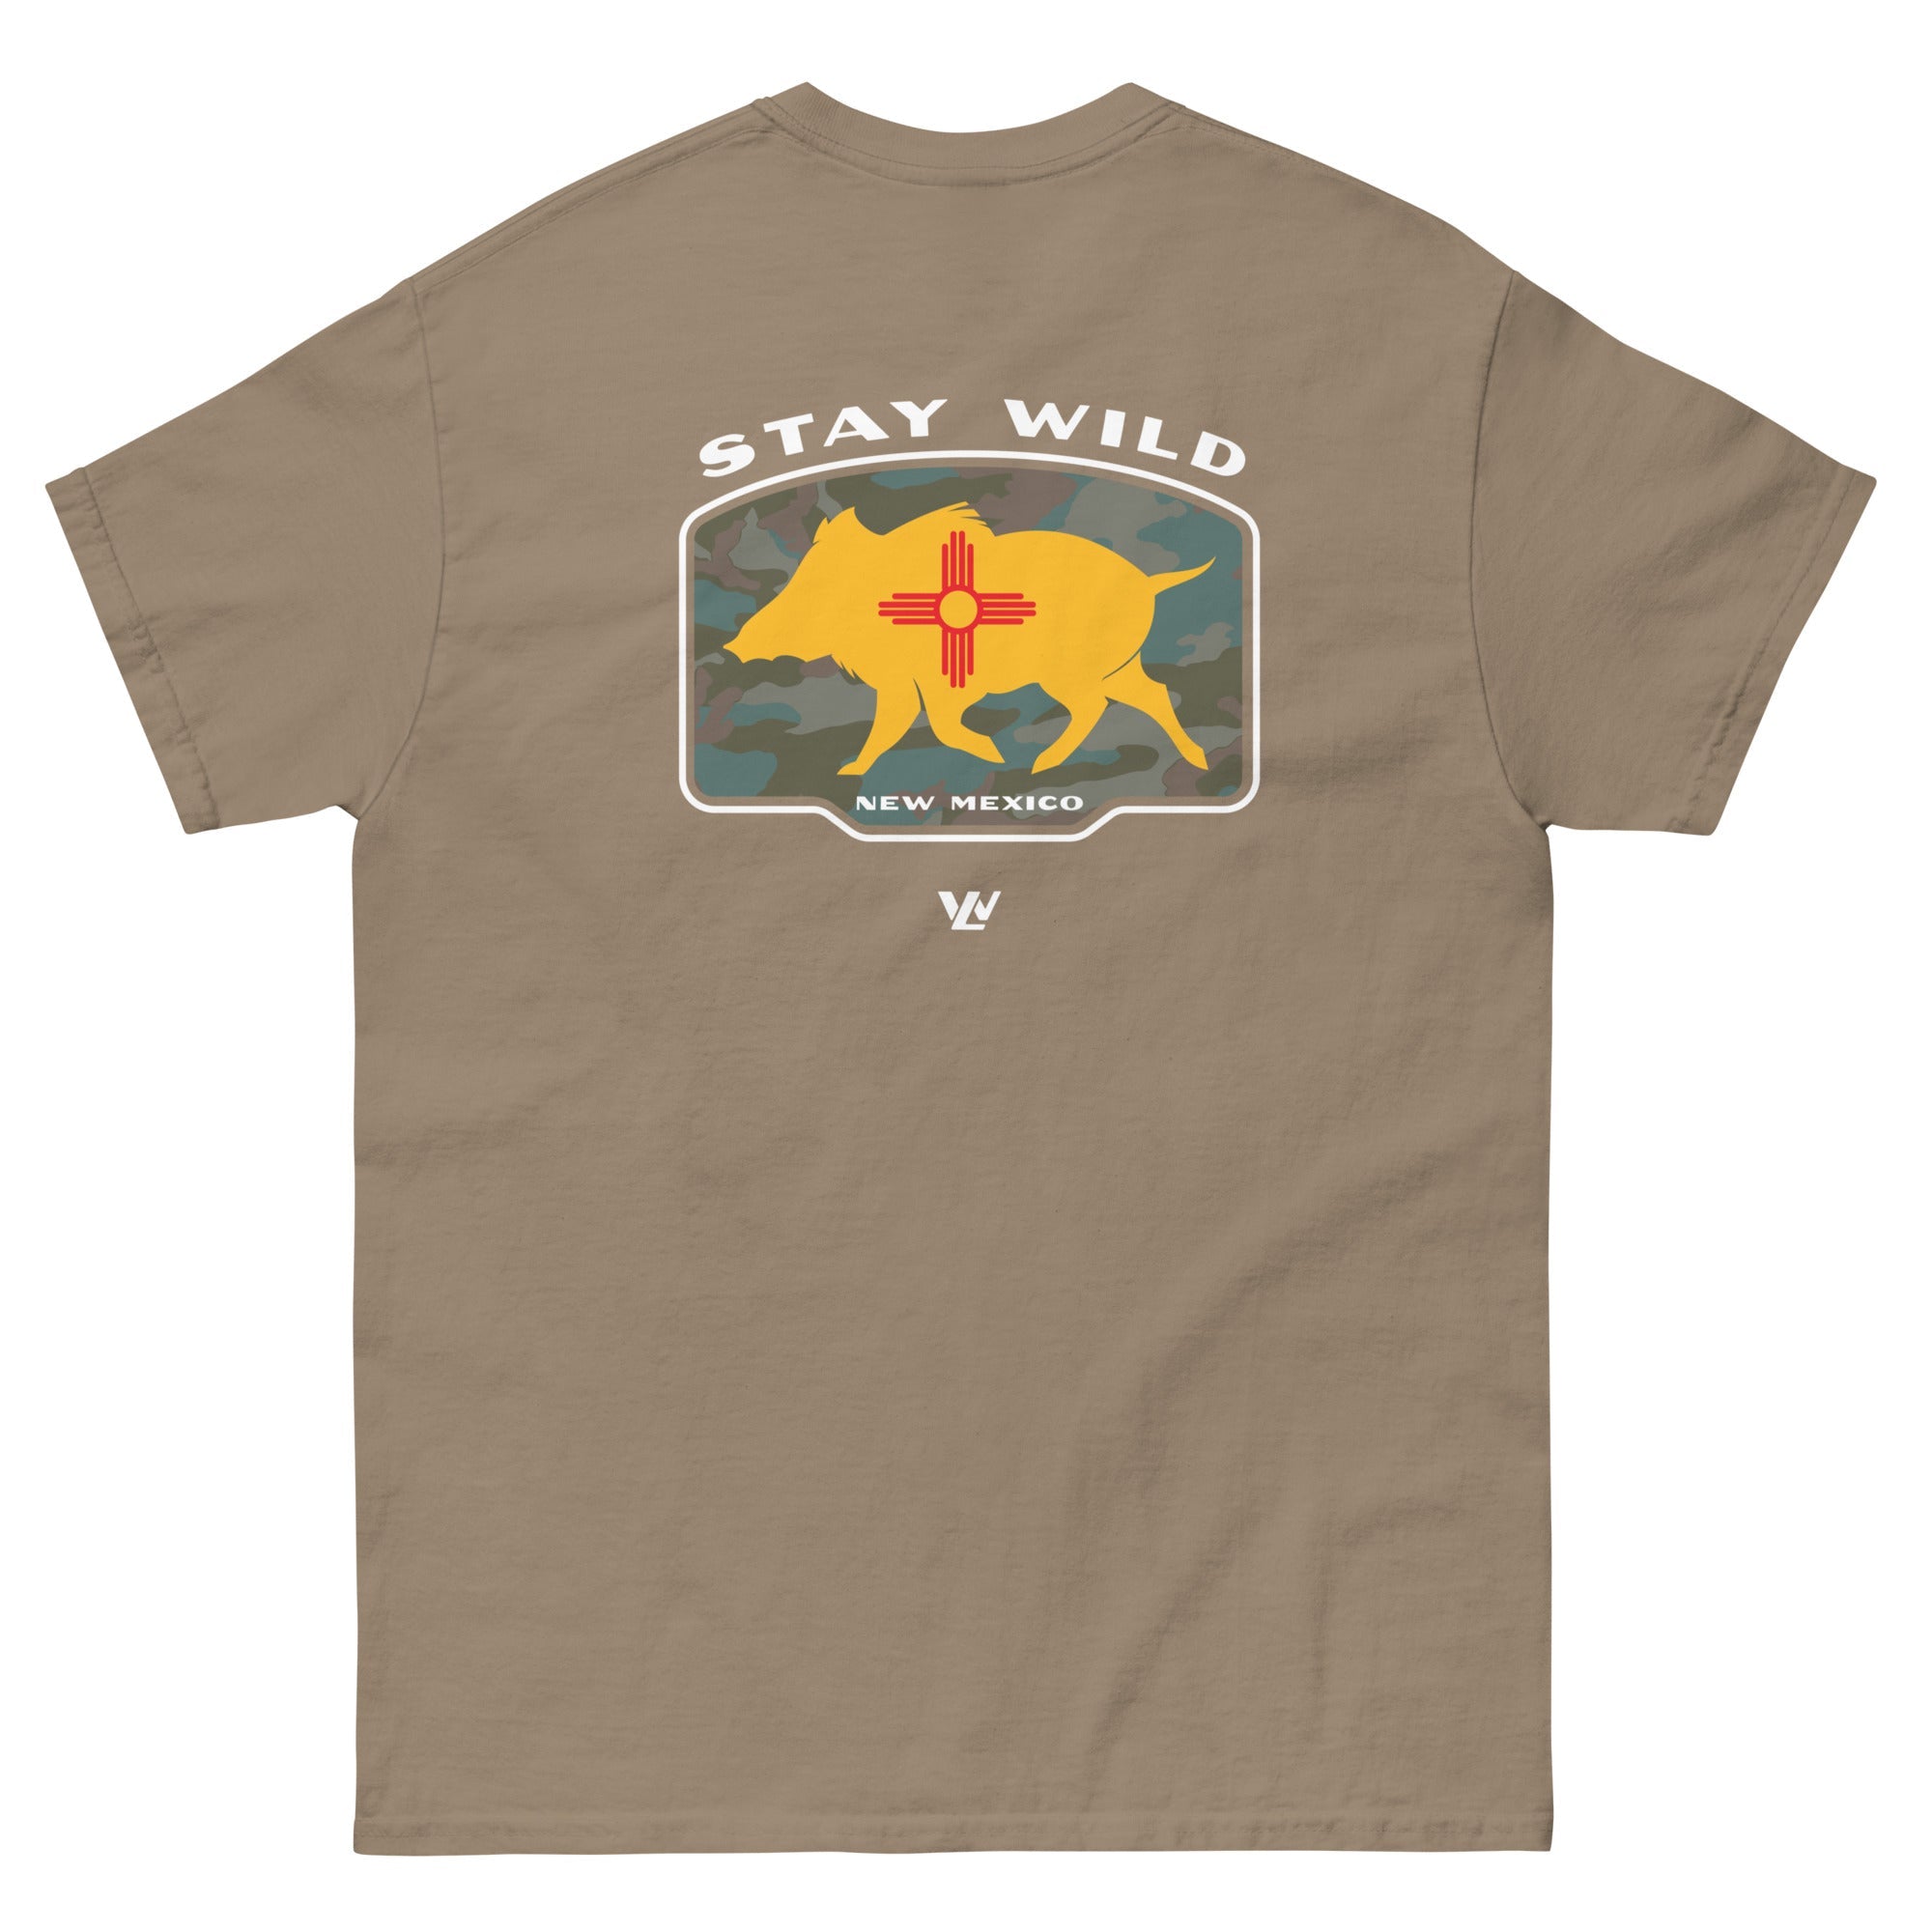 Stay Wild New Mexico T-Shirt - Wilding Life